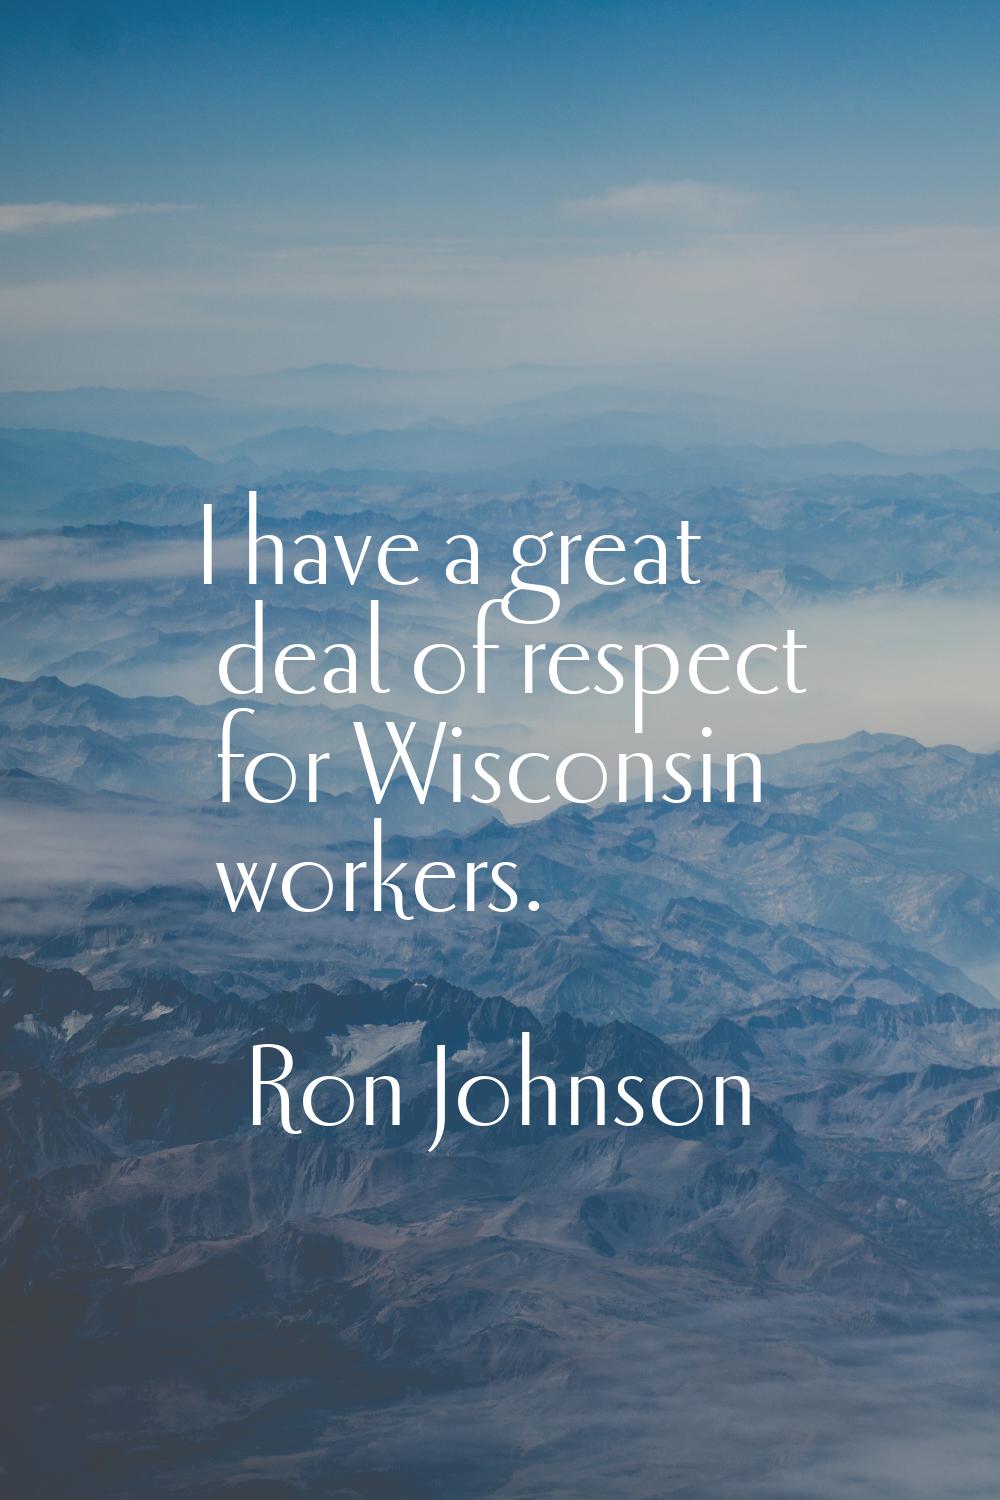 I have a great deal of respect for Wisconsin workers.